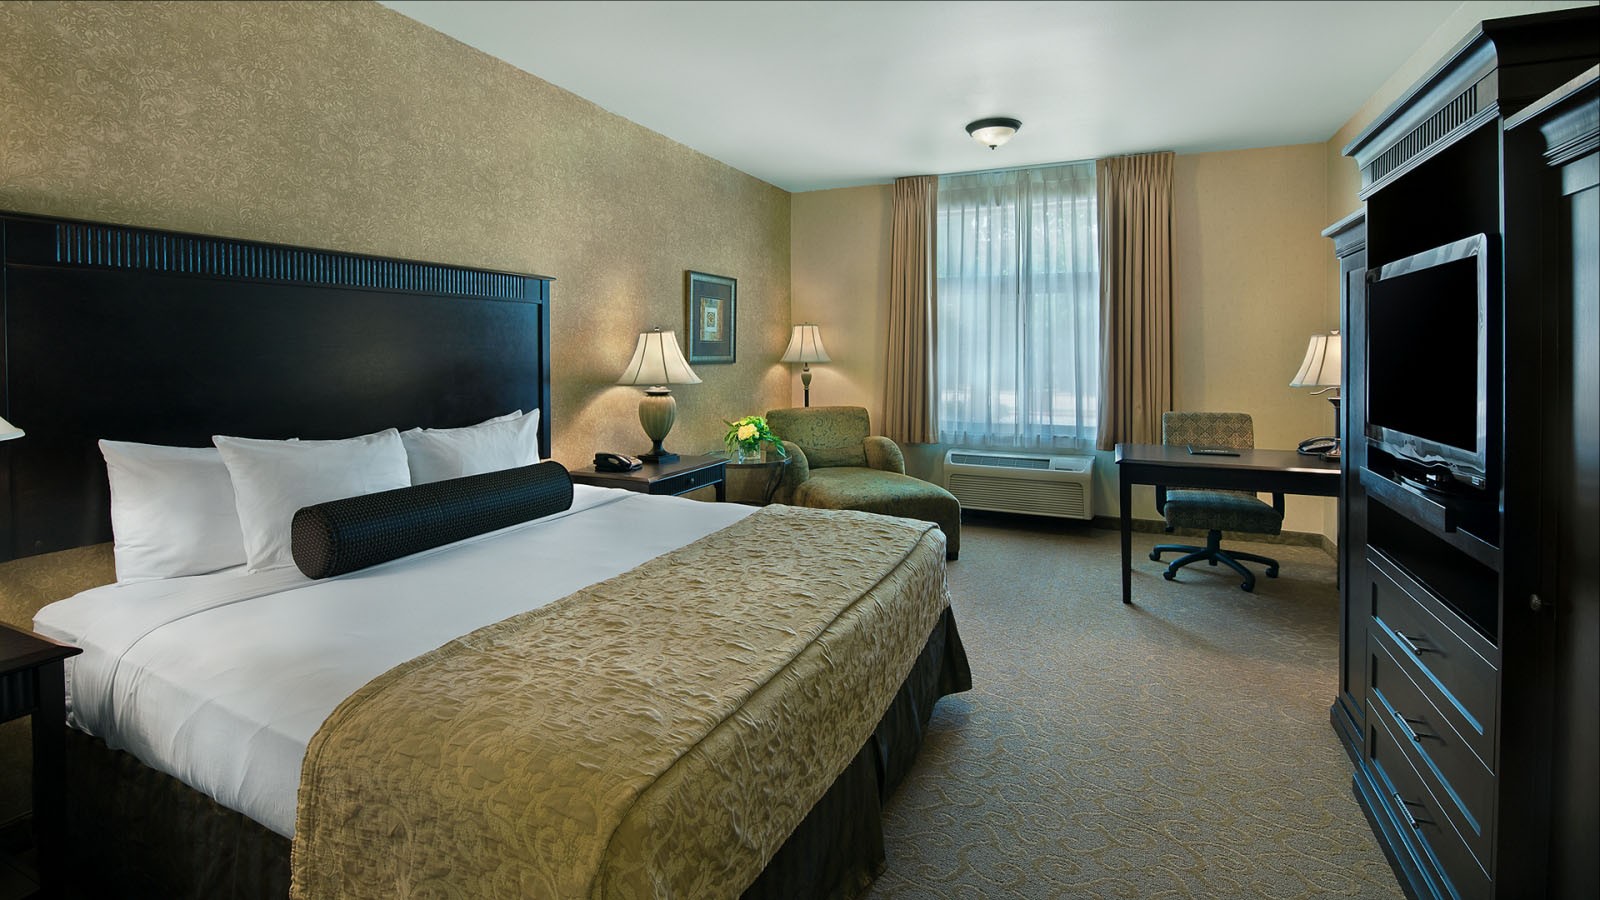 Government Traveler | Oxford Suites Boise Hotel